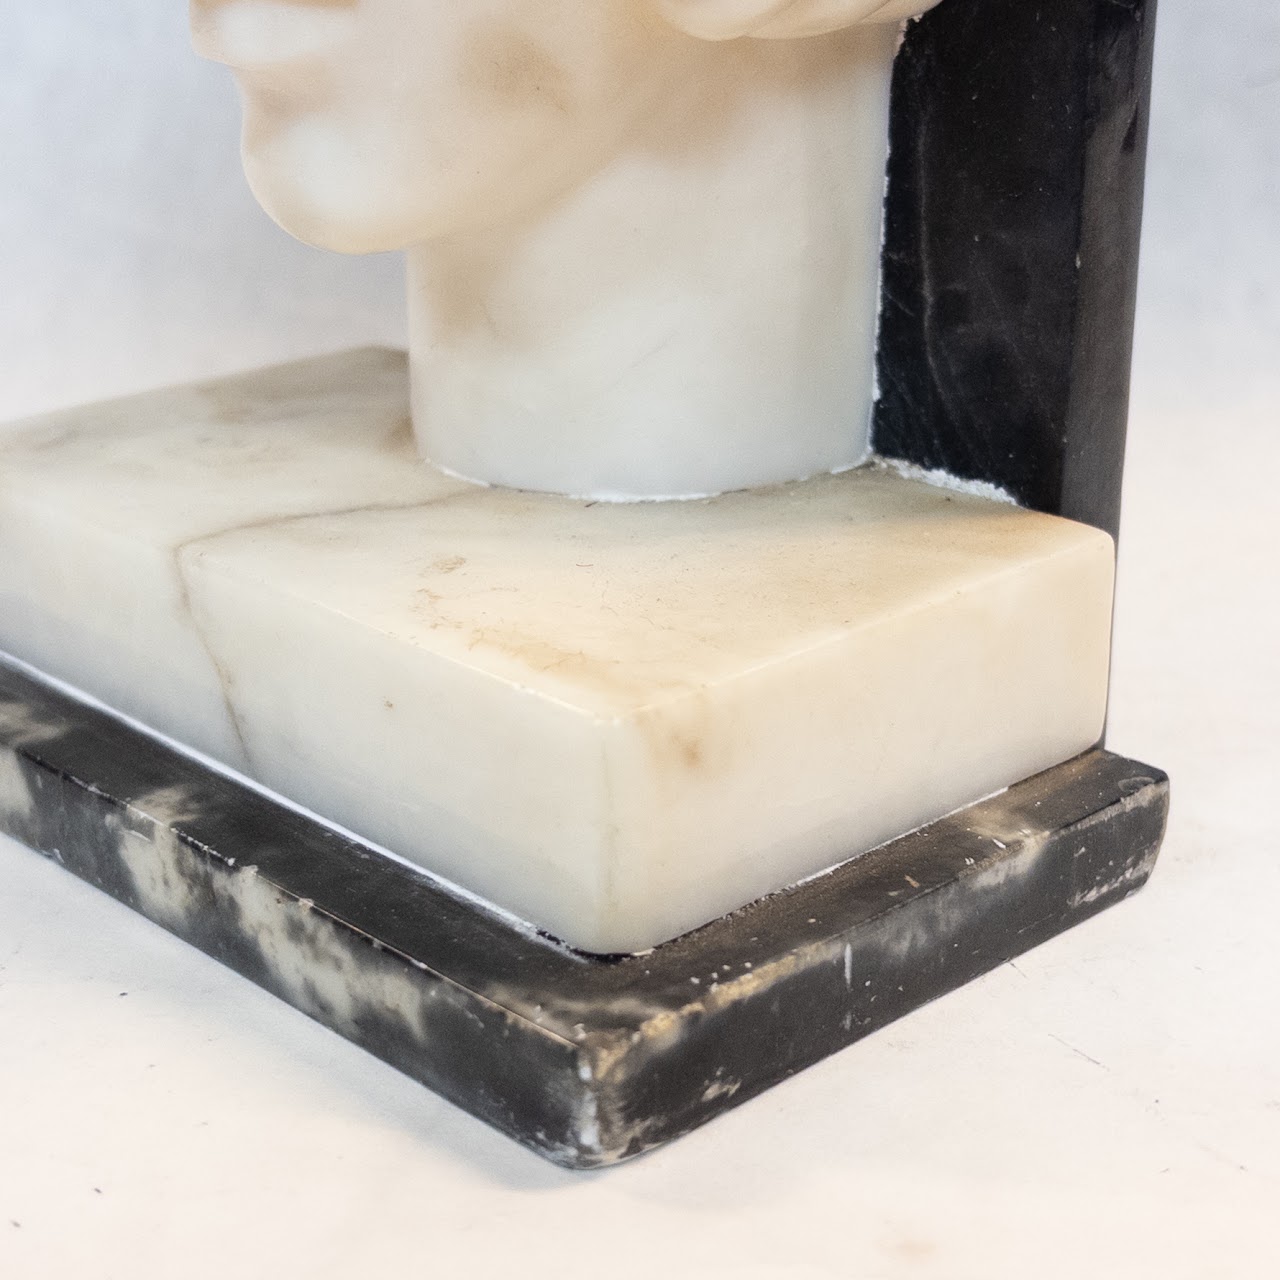 Marble Pair of Roman Emperor Styled Bookends